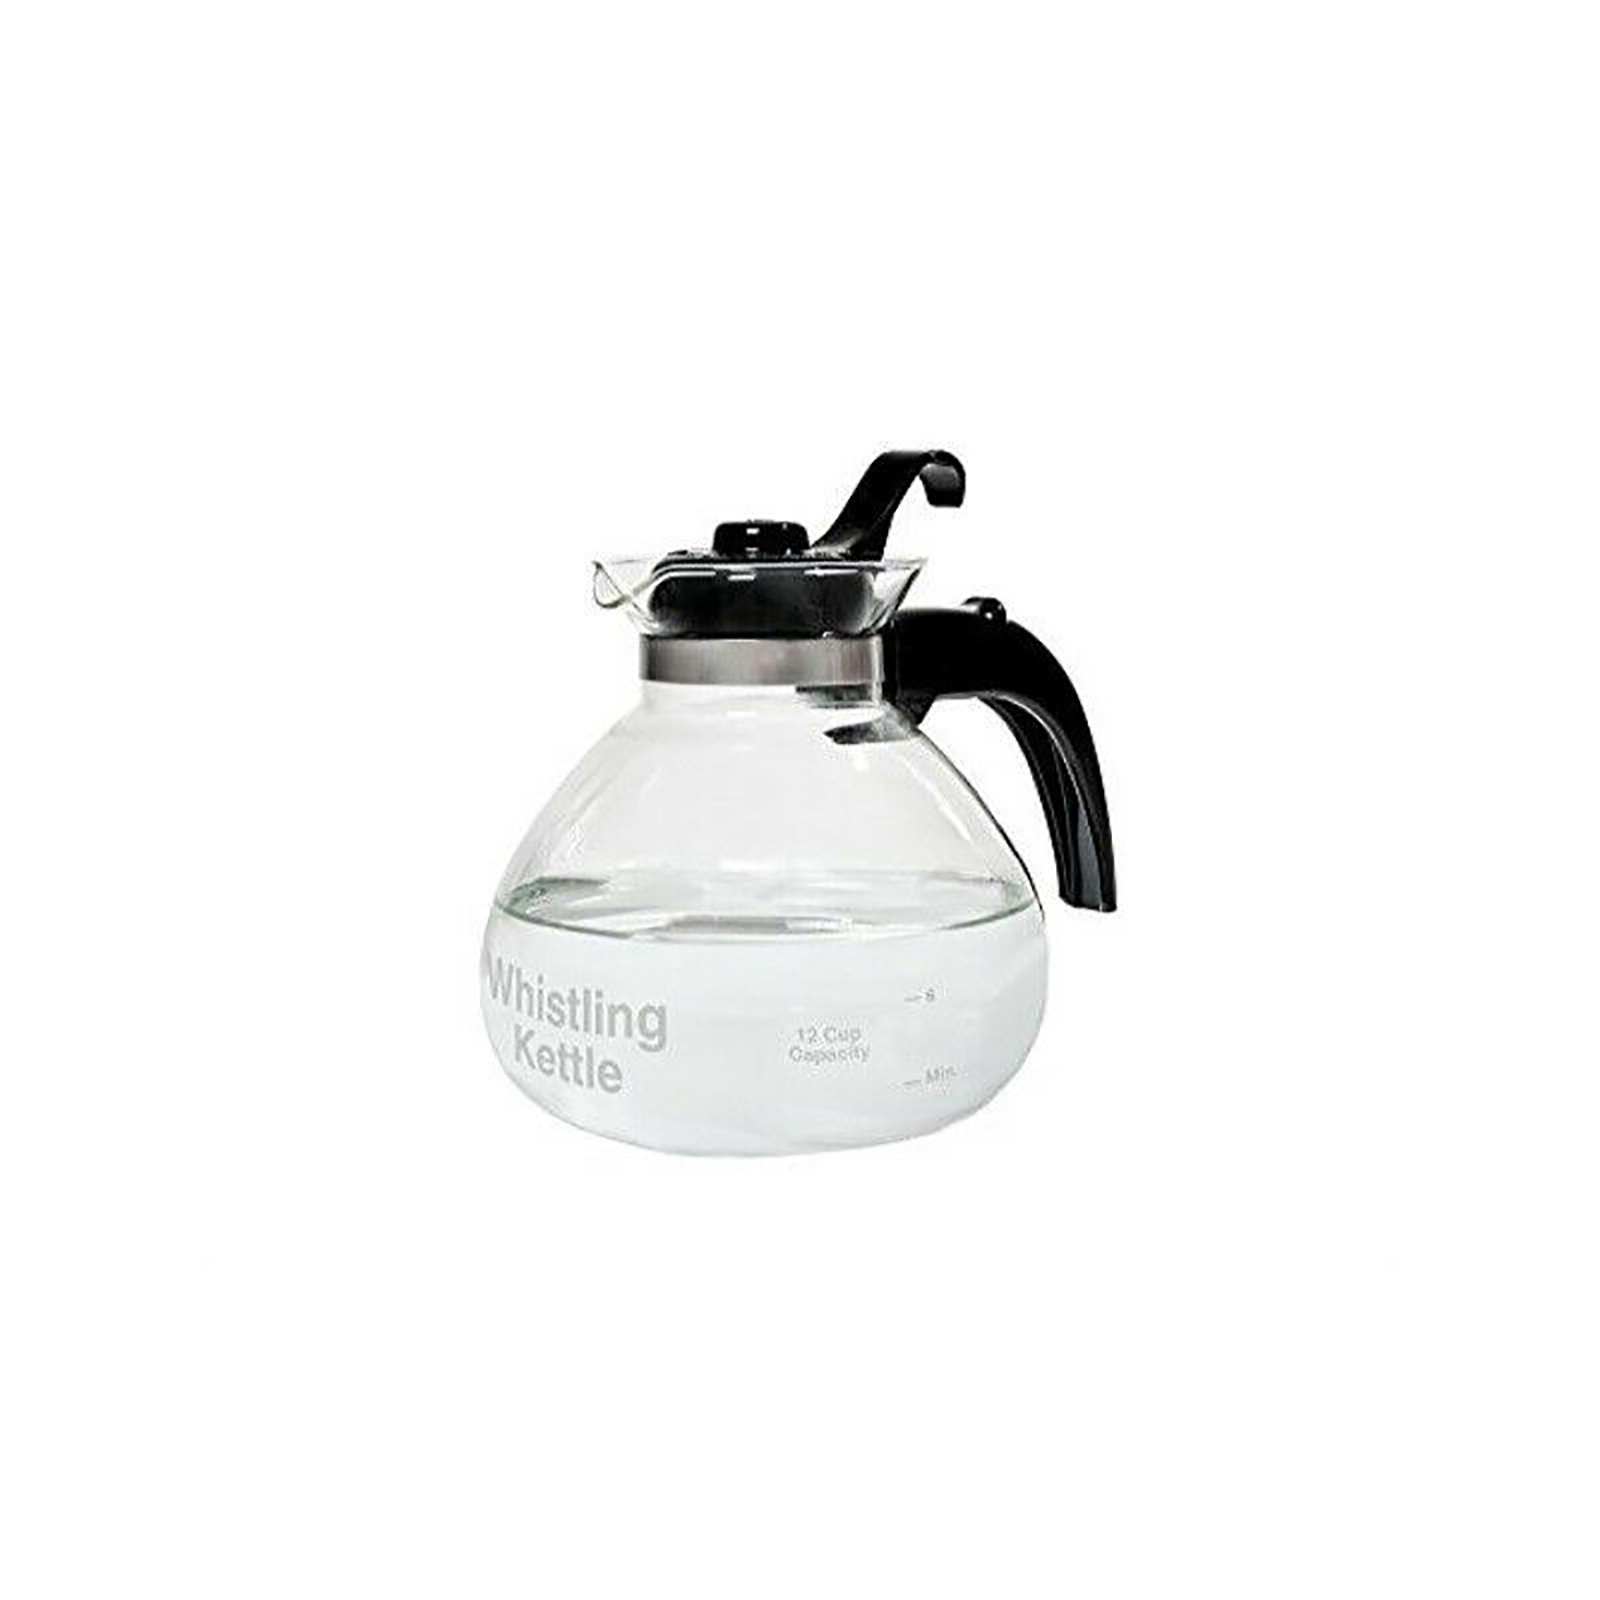 Cafe Brew Collection SKTGRP-2ShtsB 12-Cup Heat-Resistant Glass Stovetop Whistling Kettle